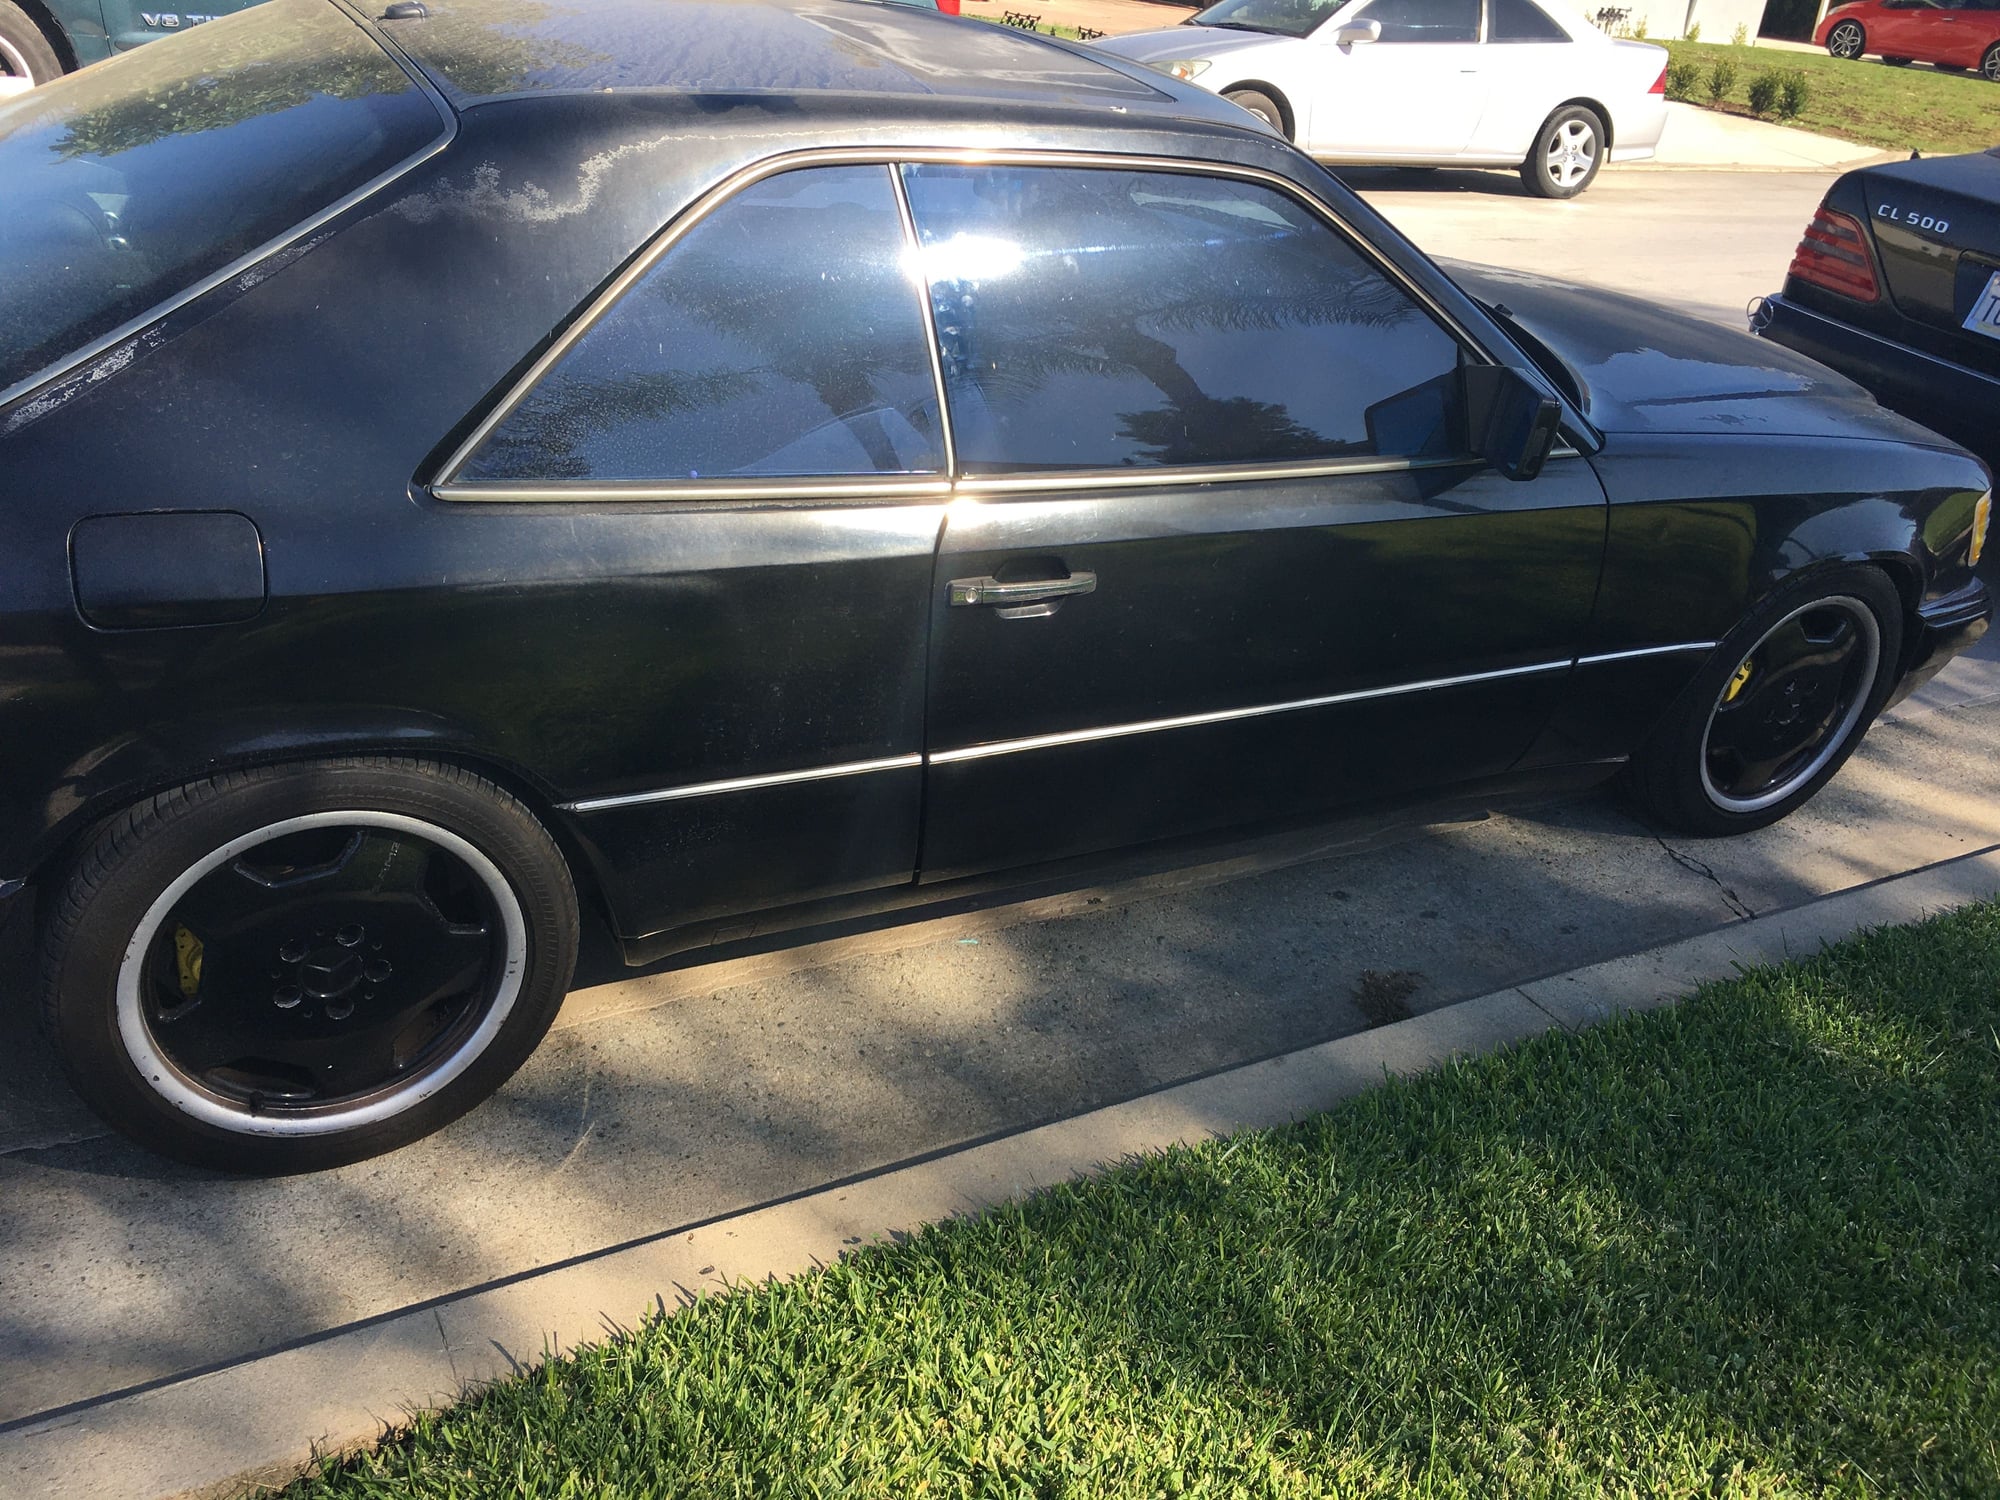 1995 Mercedes-Benz C36 AMG - 1995 C36 Carcass with lots of Parts, as well as some W124 E320 and 500E - Los Angeles, CA 91722, United States